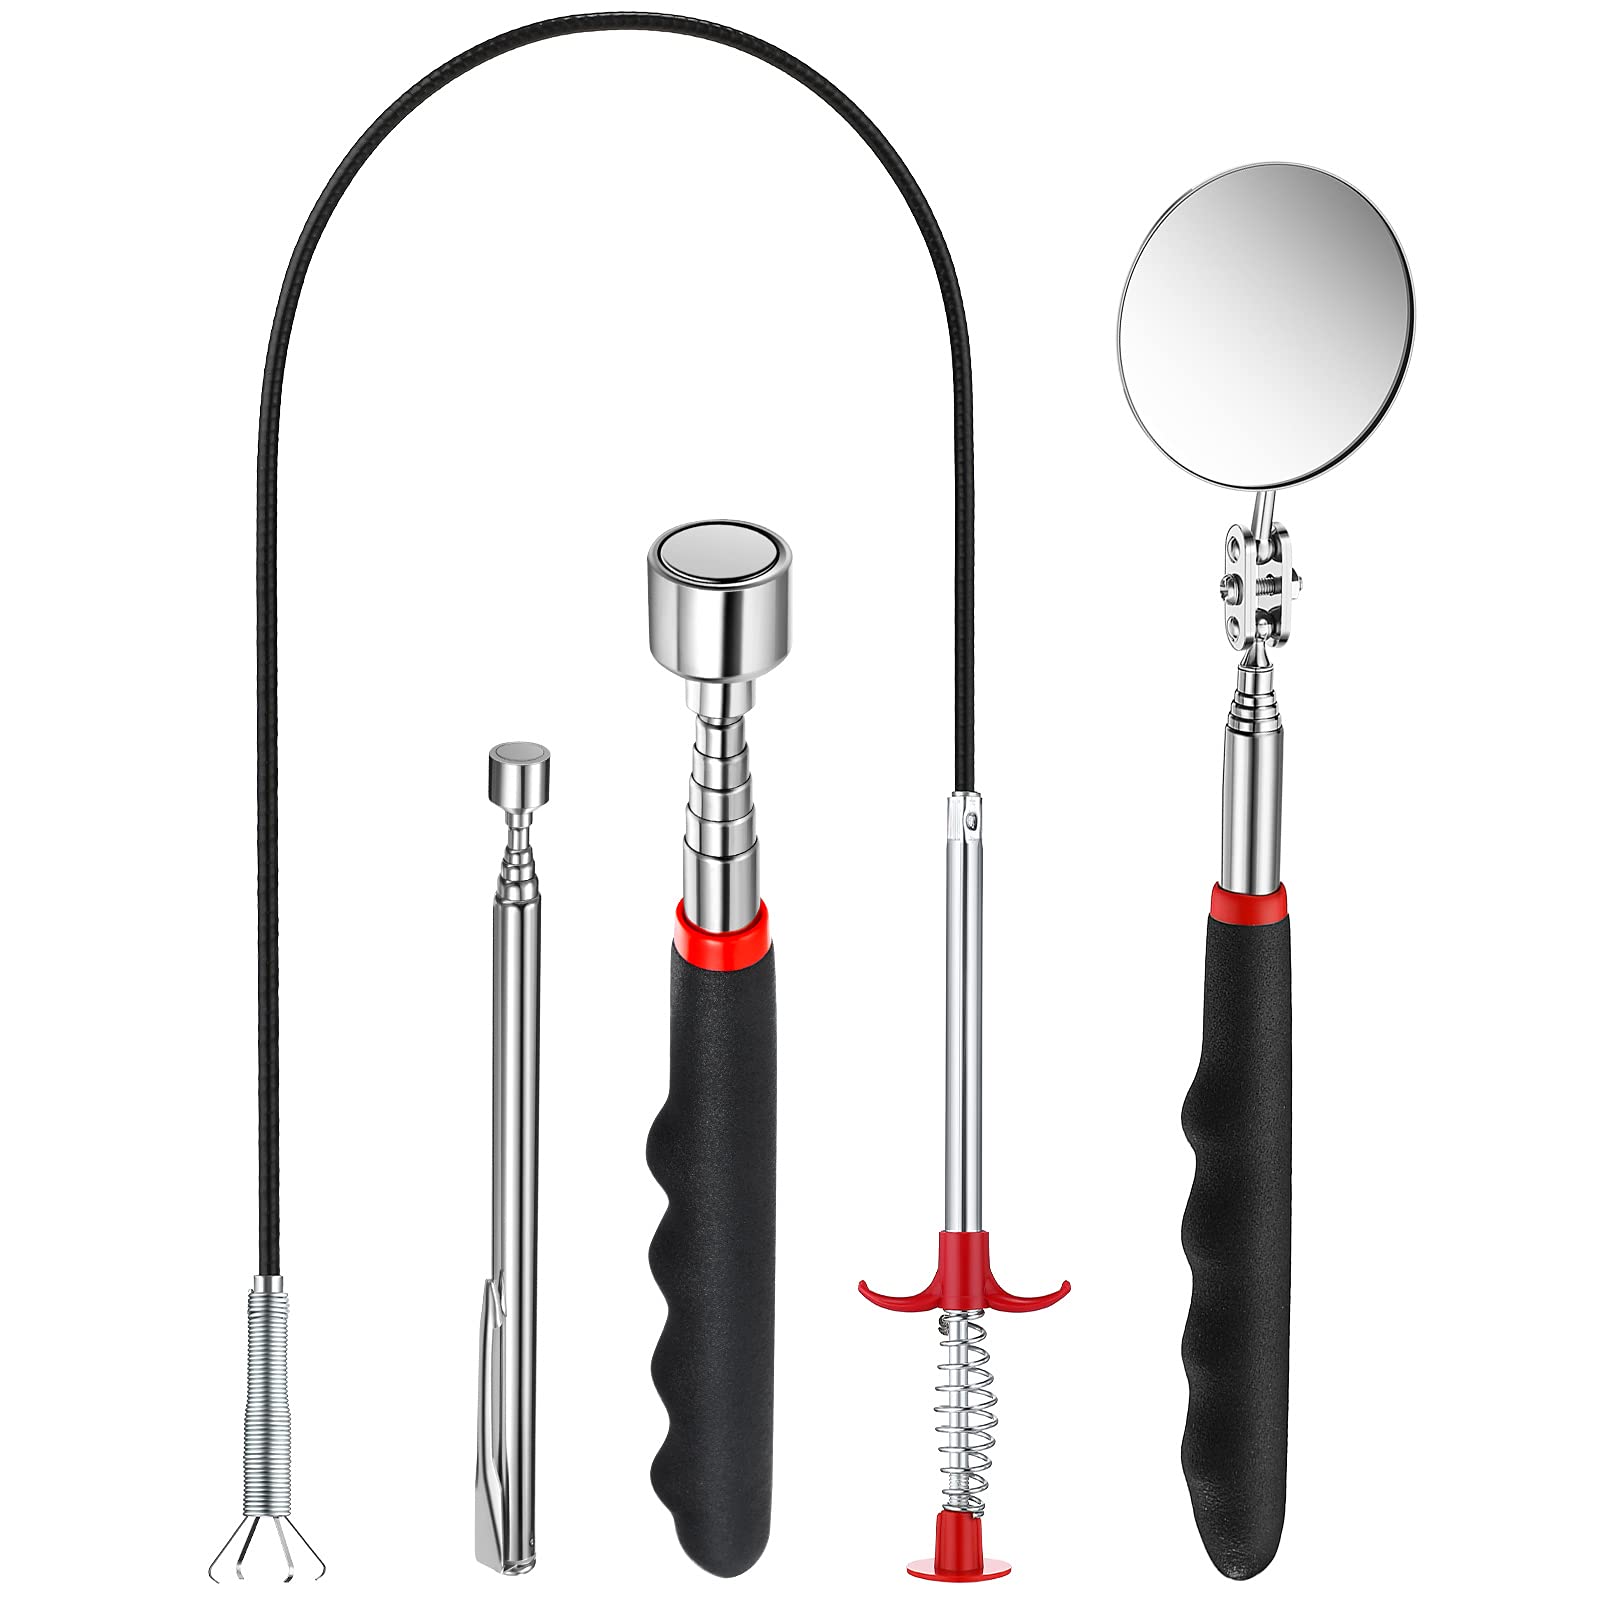 Patelai 4 Pieces Christmas Telescoping Magnet Pick Up Tool Set Extendable Claw Grabber Tool Bendable Spring Telescoping Inspection Mirror 2 Lb/ 20 Lb Magnetic Stick Gadget for Home Sink Drains